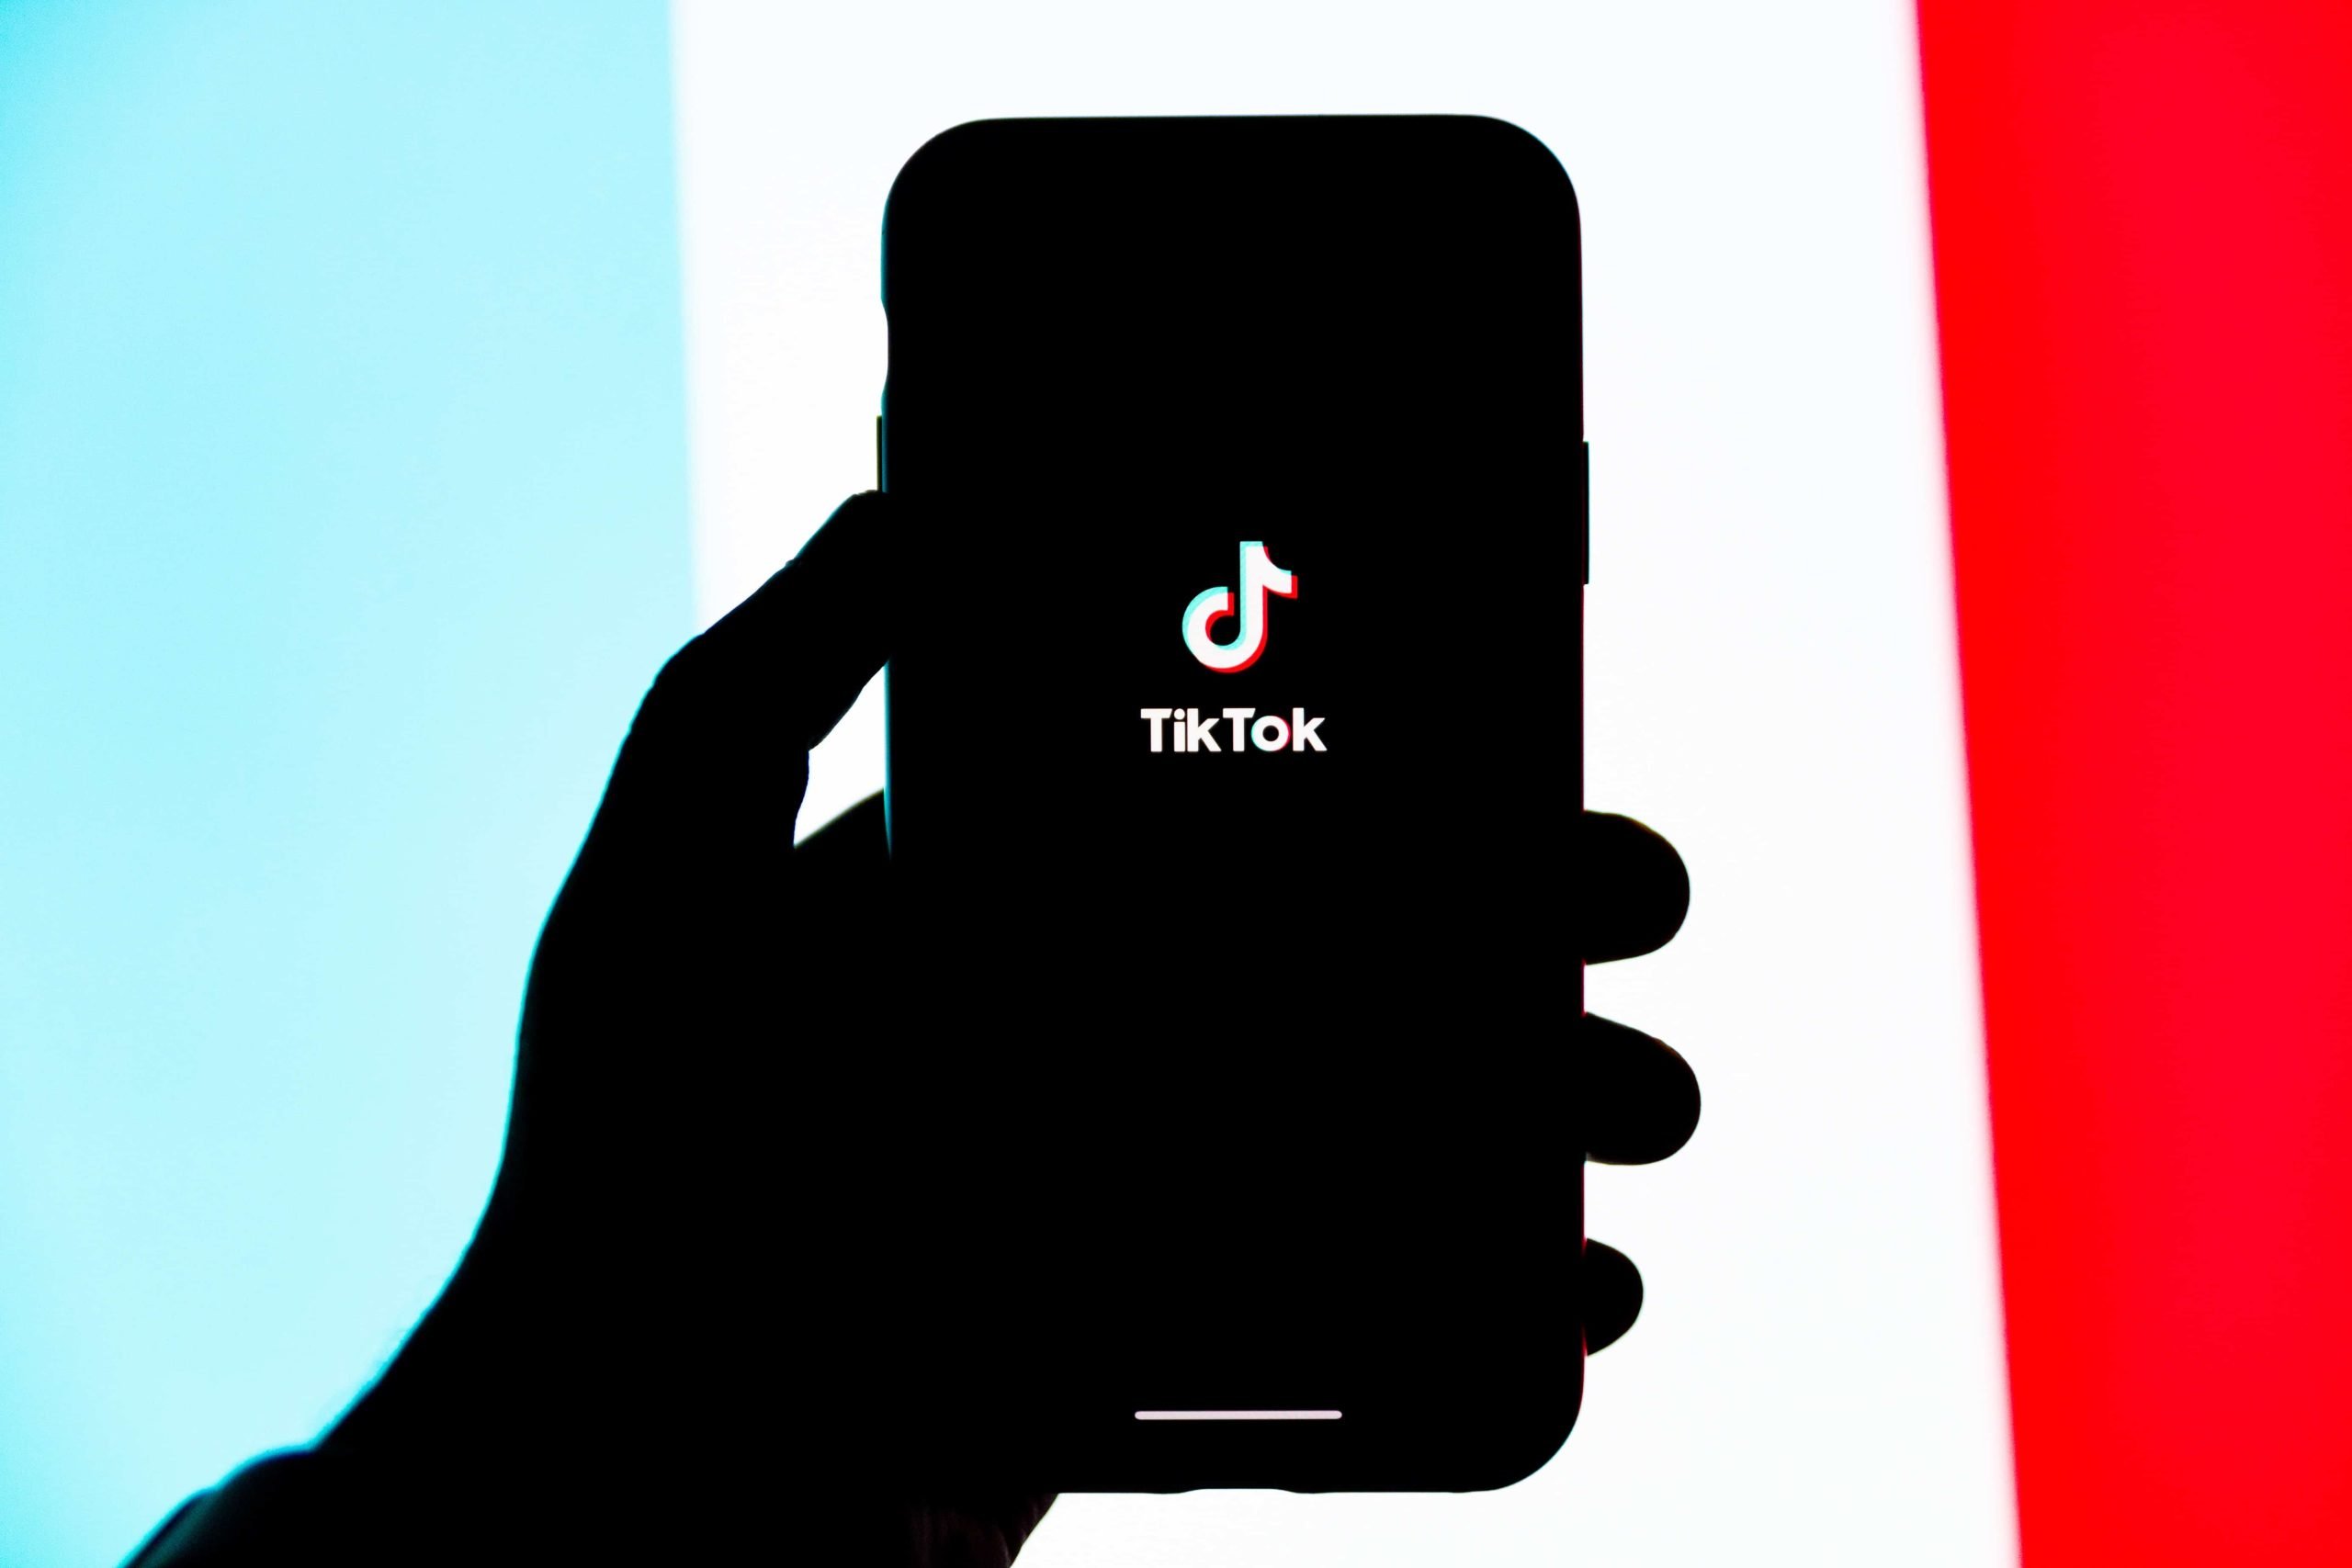 Universal Music Group releases album compilation of sped-up tracks in response to Tik Tok trend